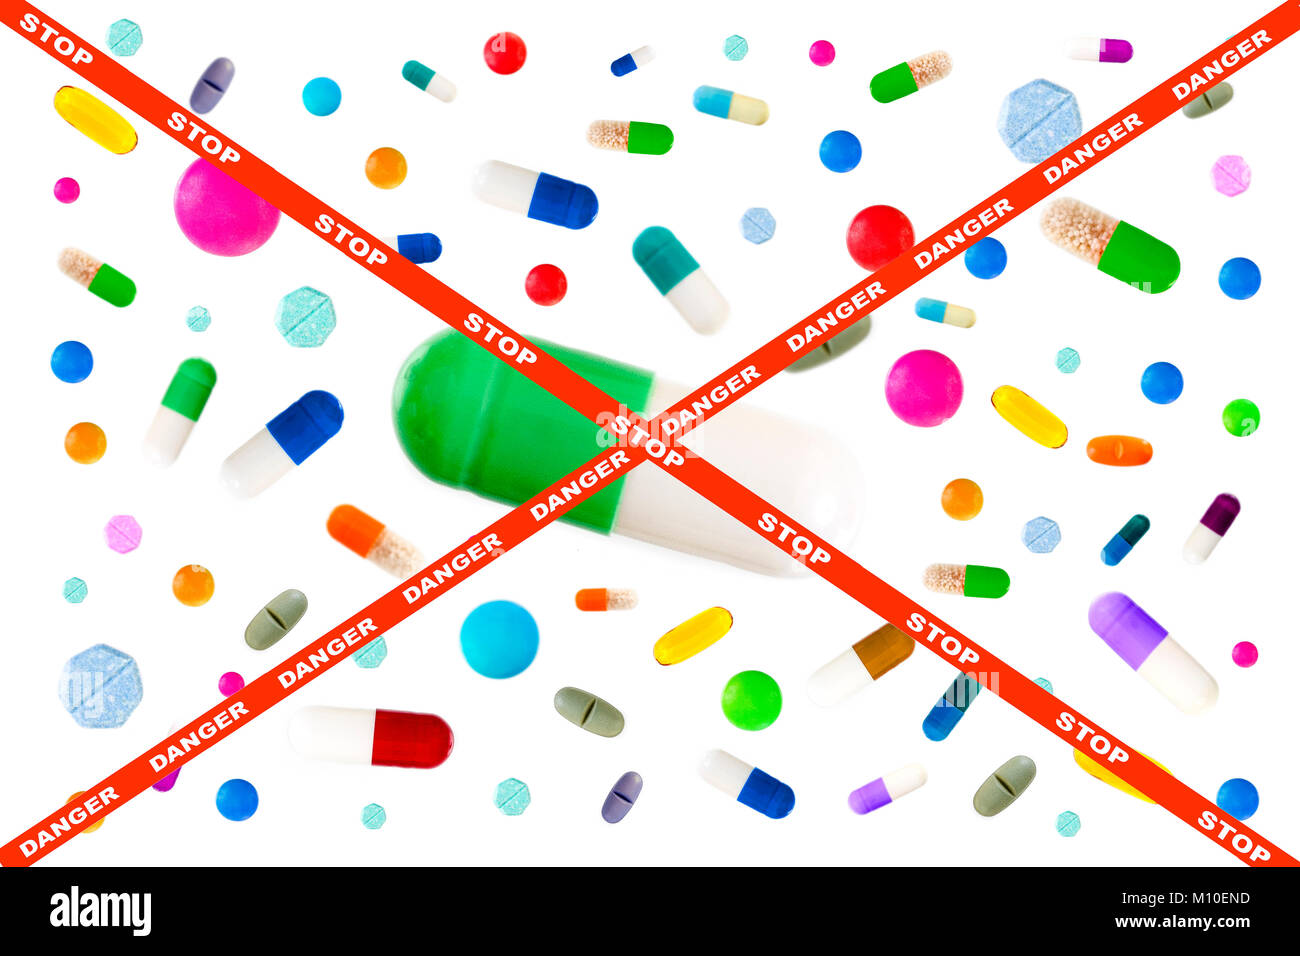 picture crossing through stop and danger on red ribbon, Symbol image of drugs danger : Many colorful medicines. Pills and capsules on white background Stock Photo